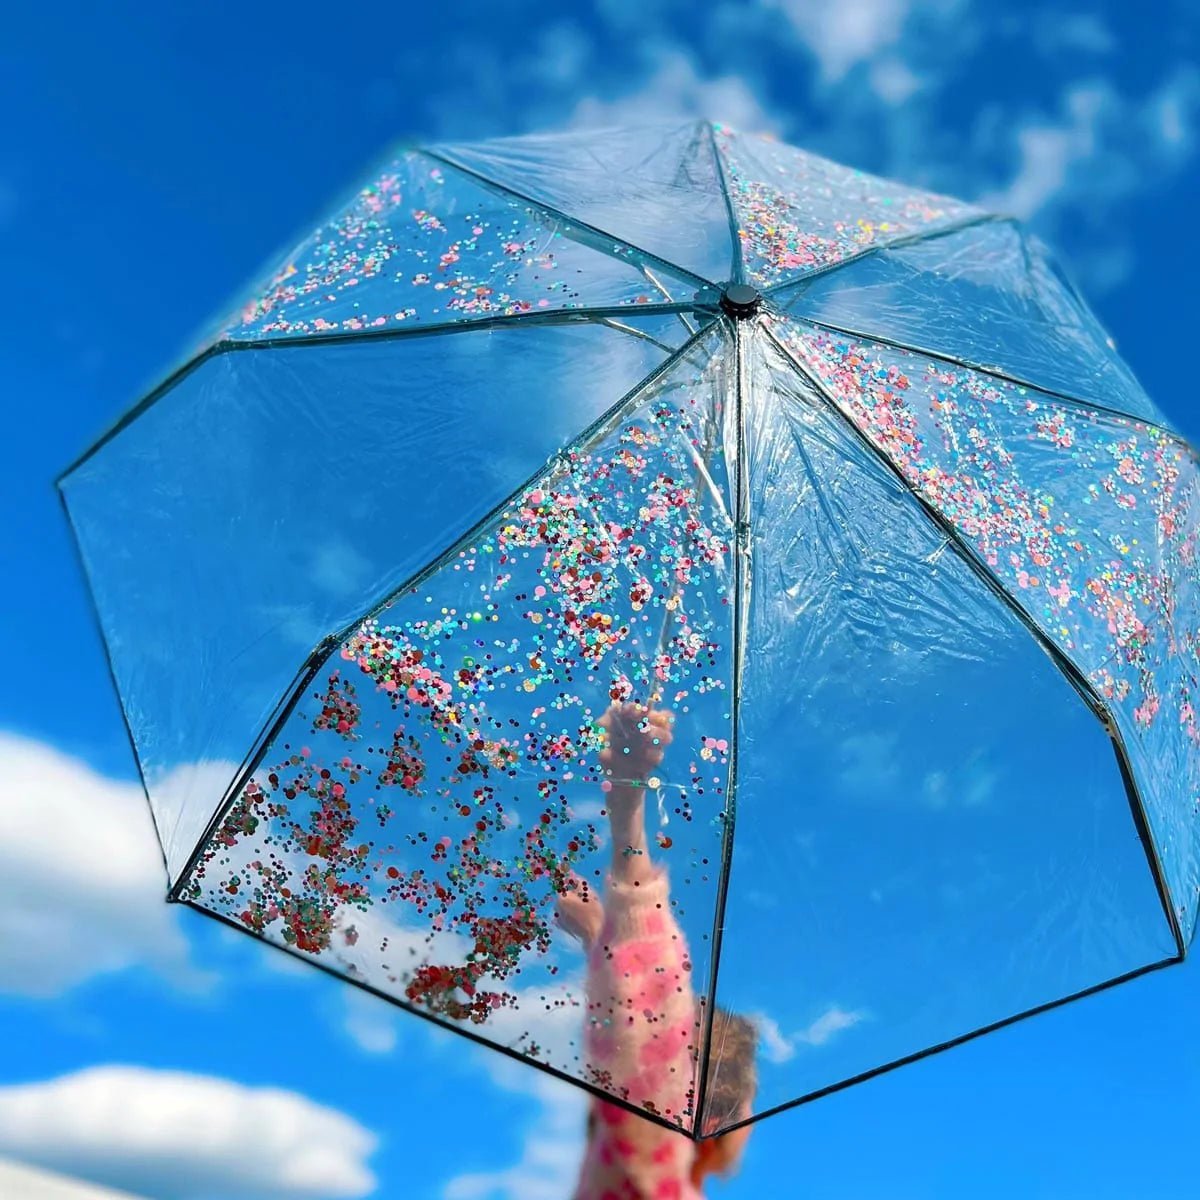 Shop Packed Party Raining Confetti Umbrella - Premium Umbrella from Packed Party Online now at Spoiled Brat 